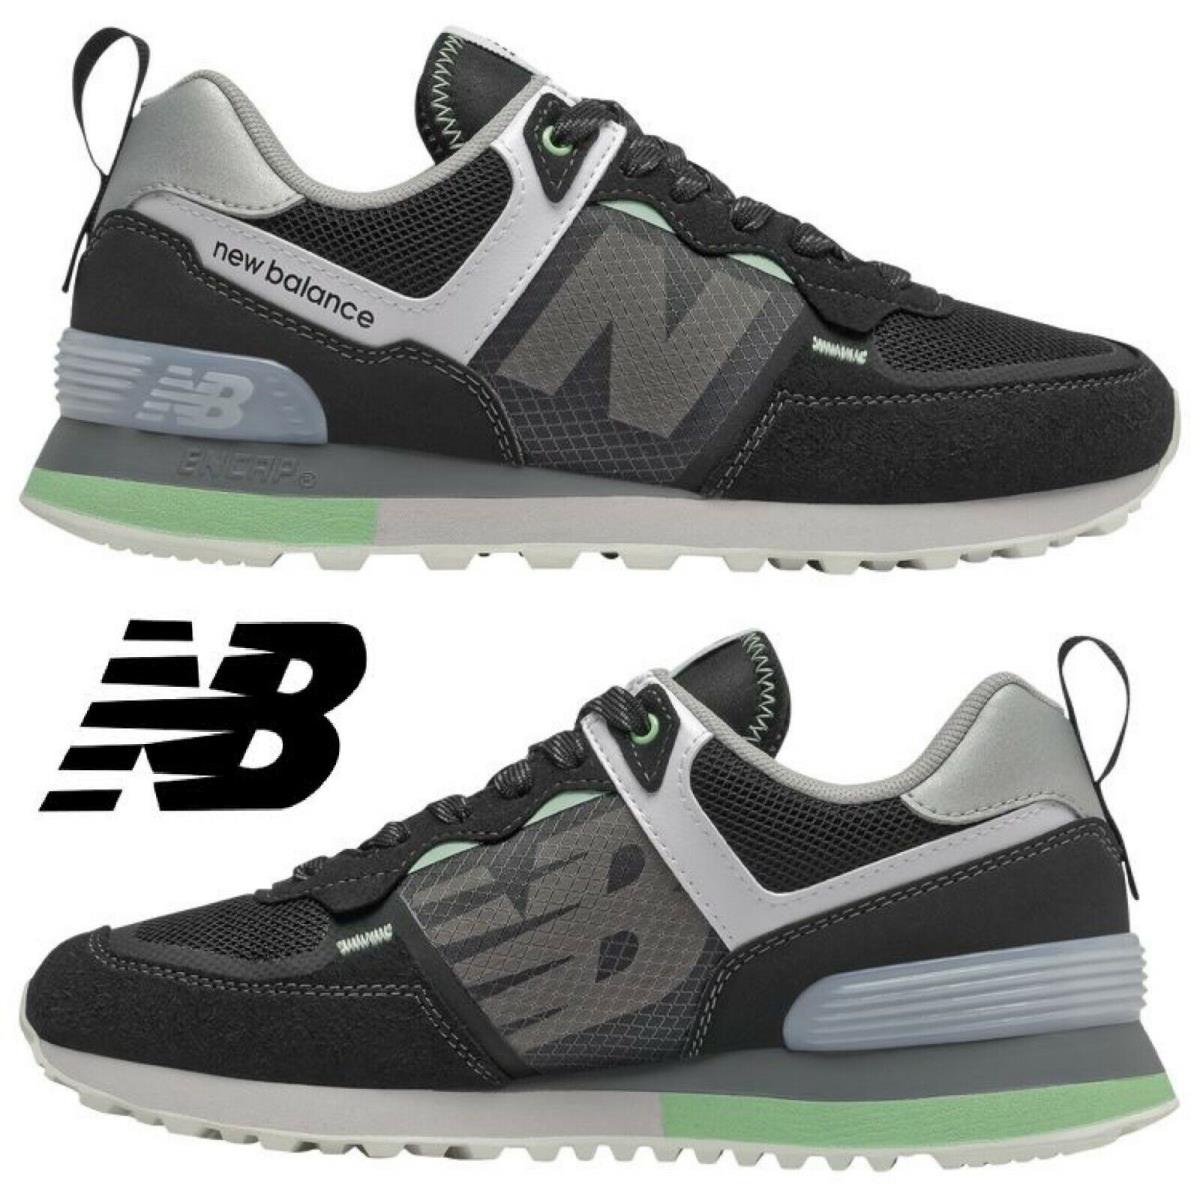 Balance 574 Sneakers Women`s Casual Classic Shoes Running Sport Gym Black